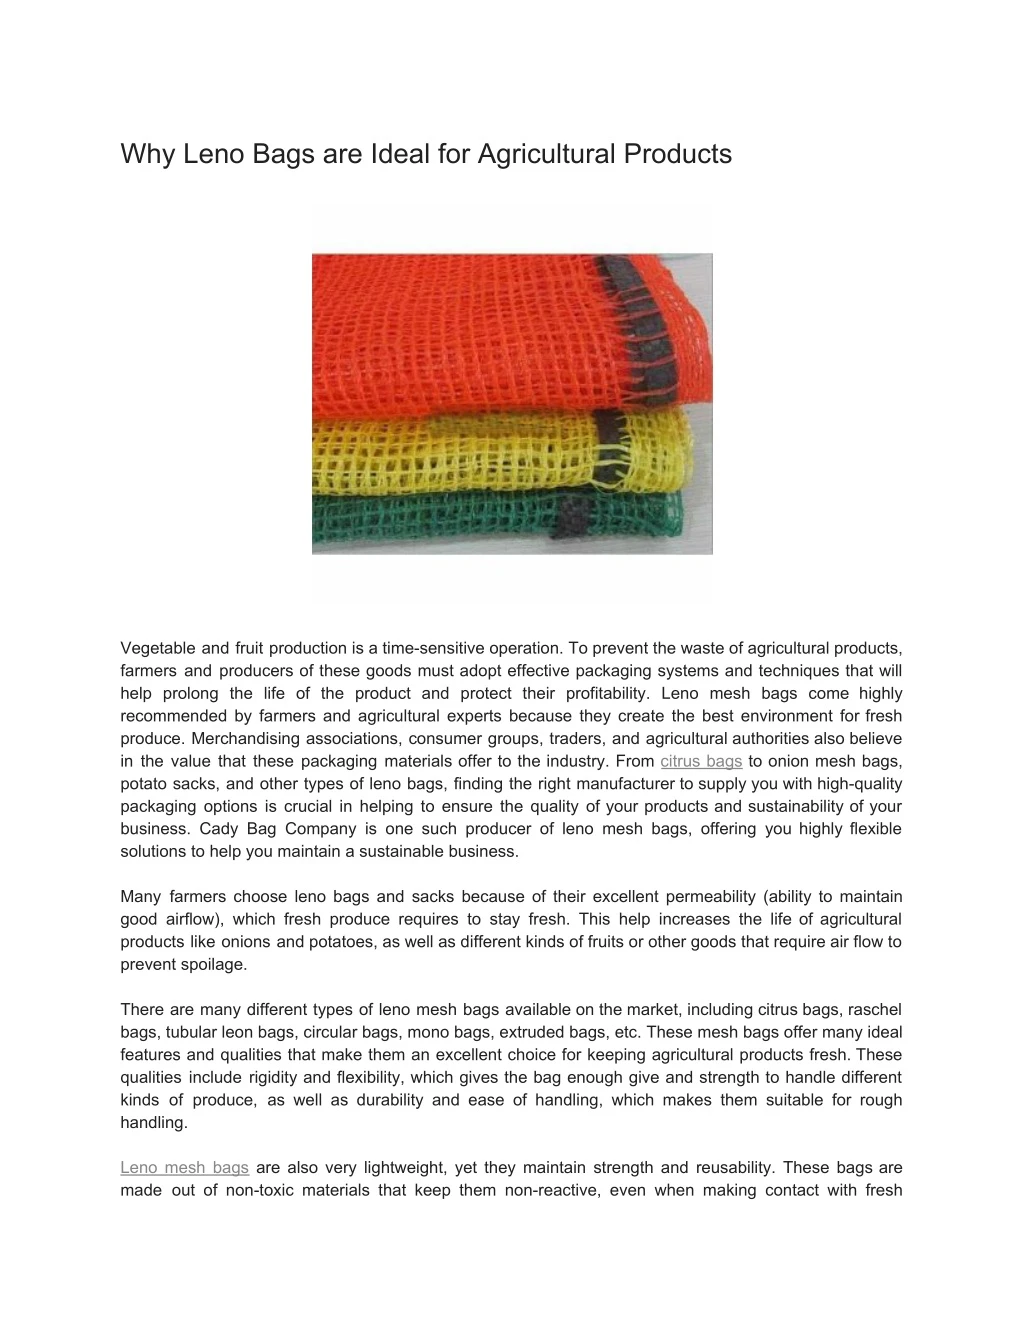 why leno bags are ideal for agricultural products